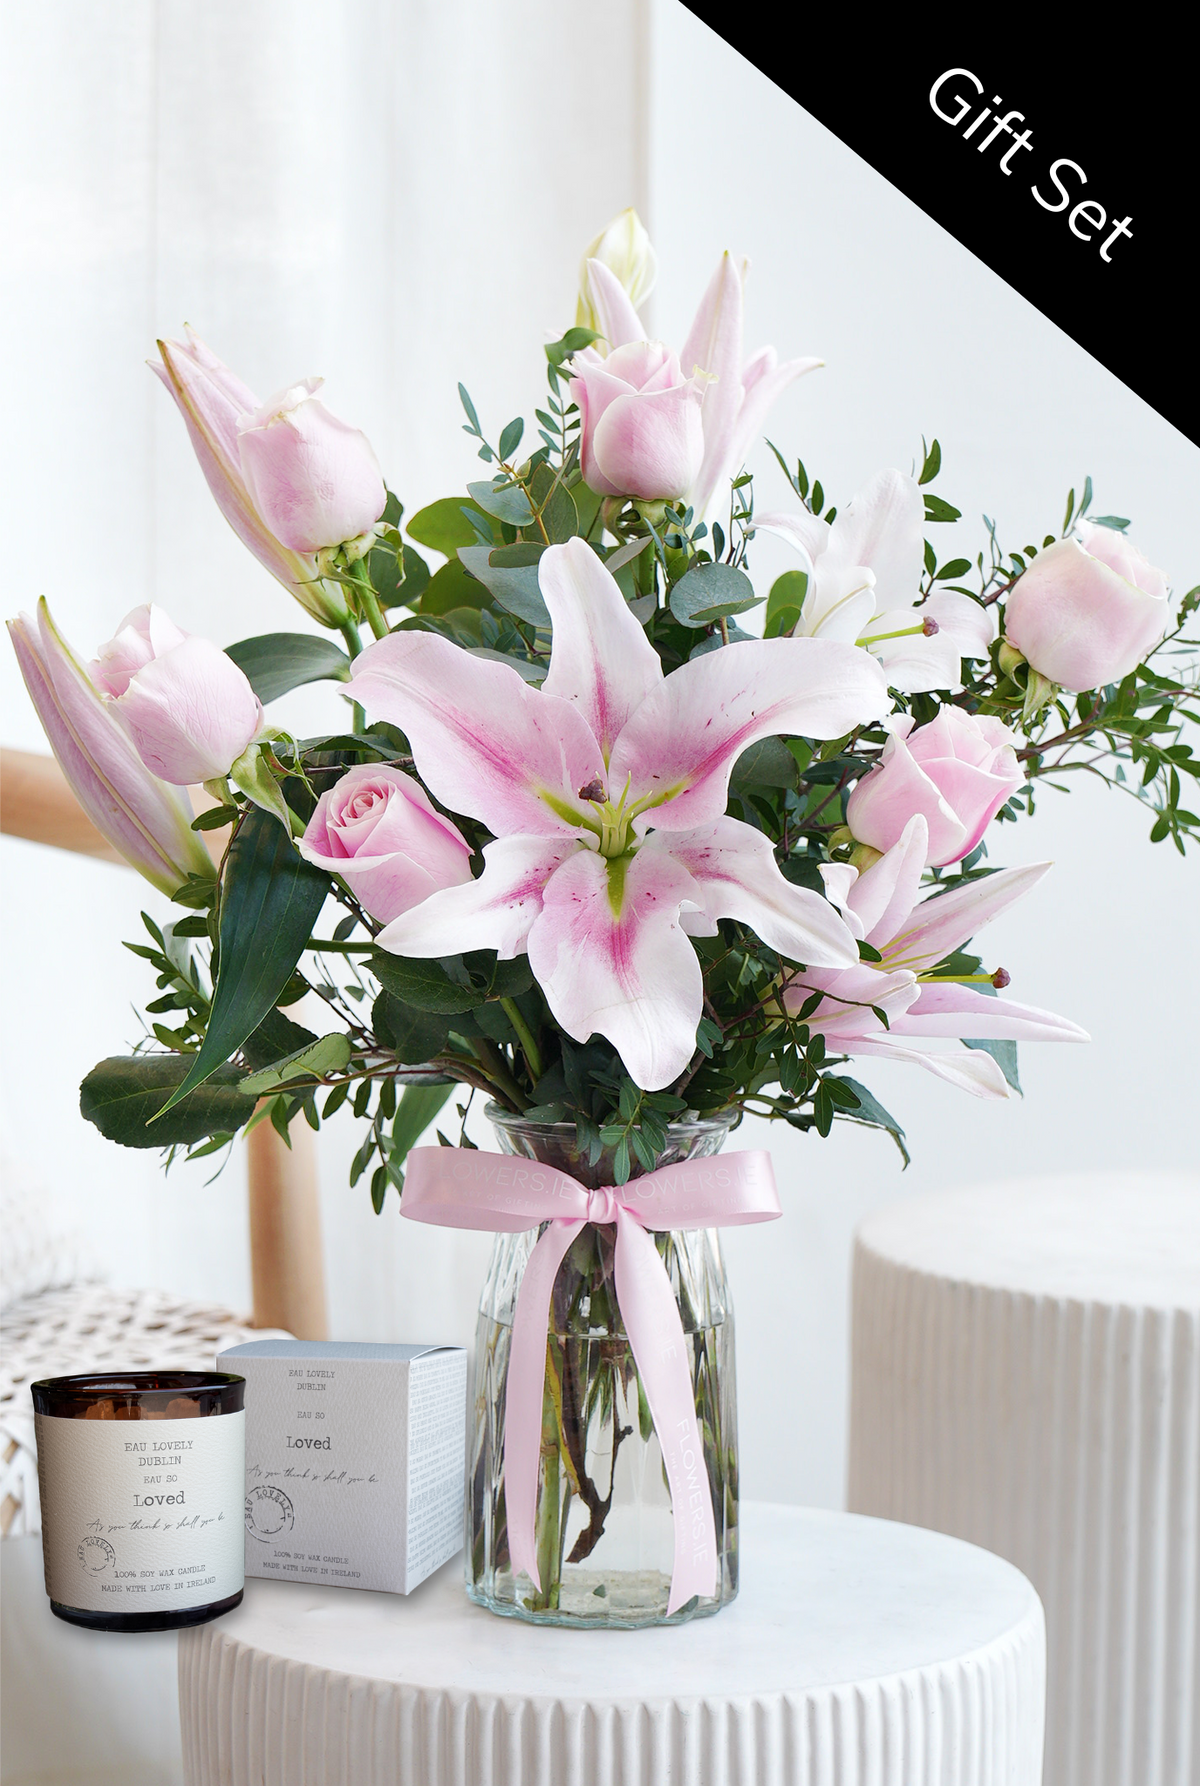 Valentine Romantic Pink Roses and Pink Lily - Vase